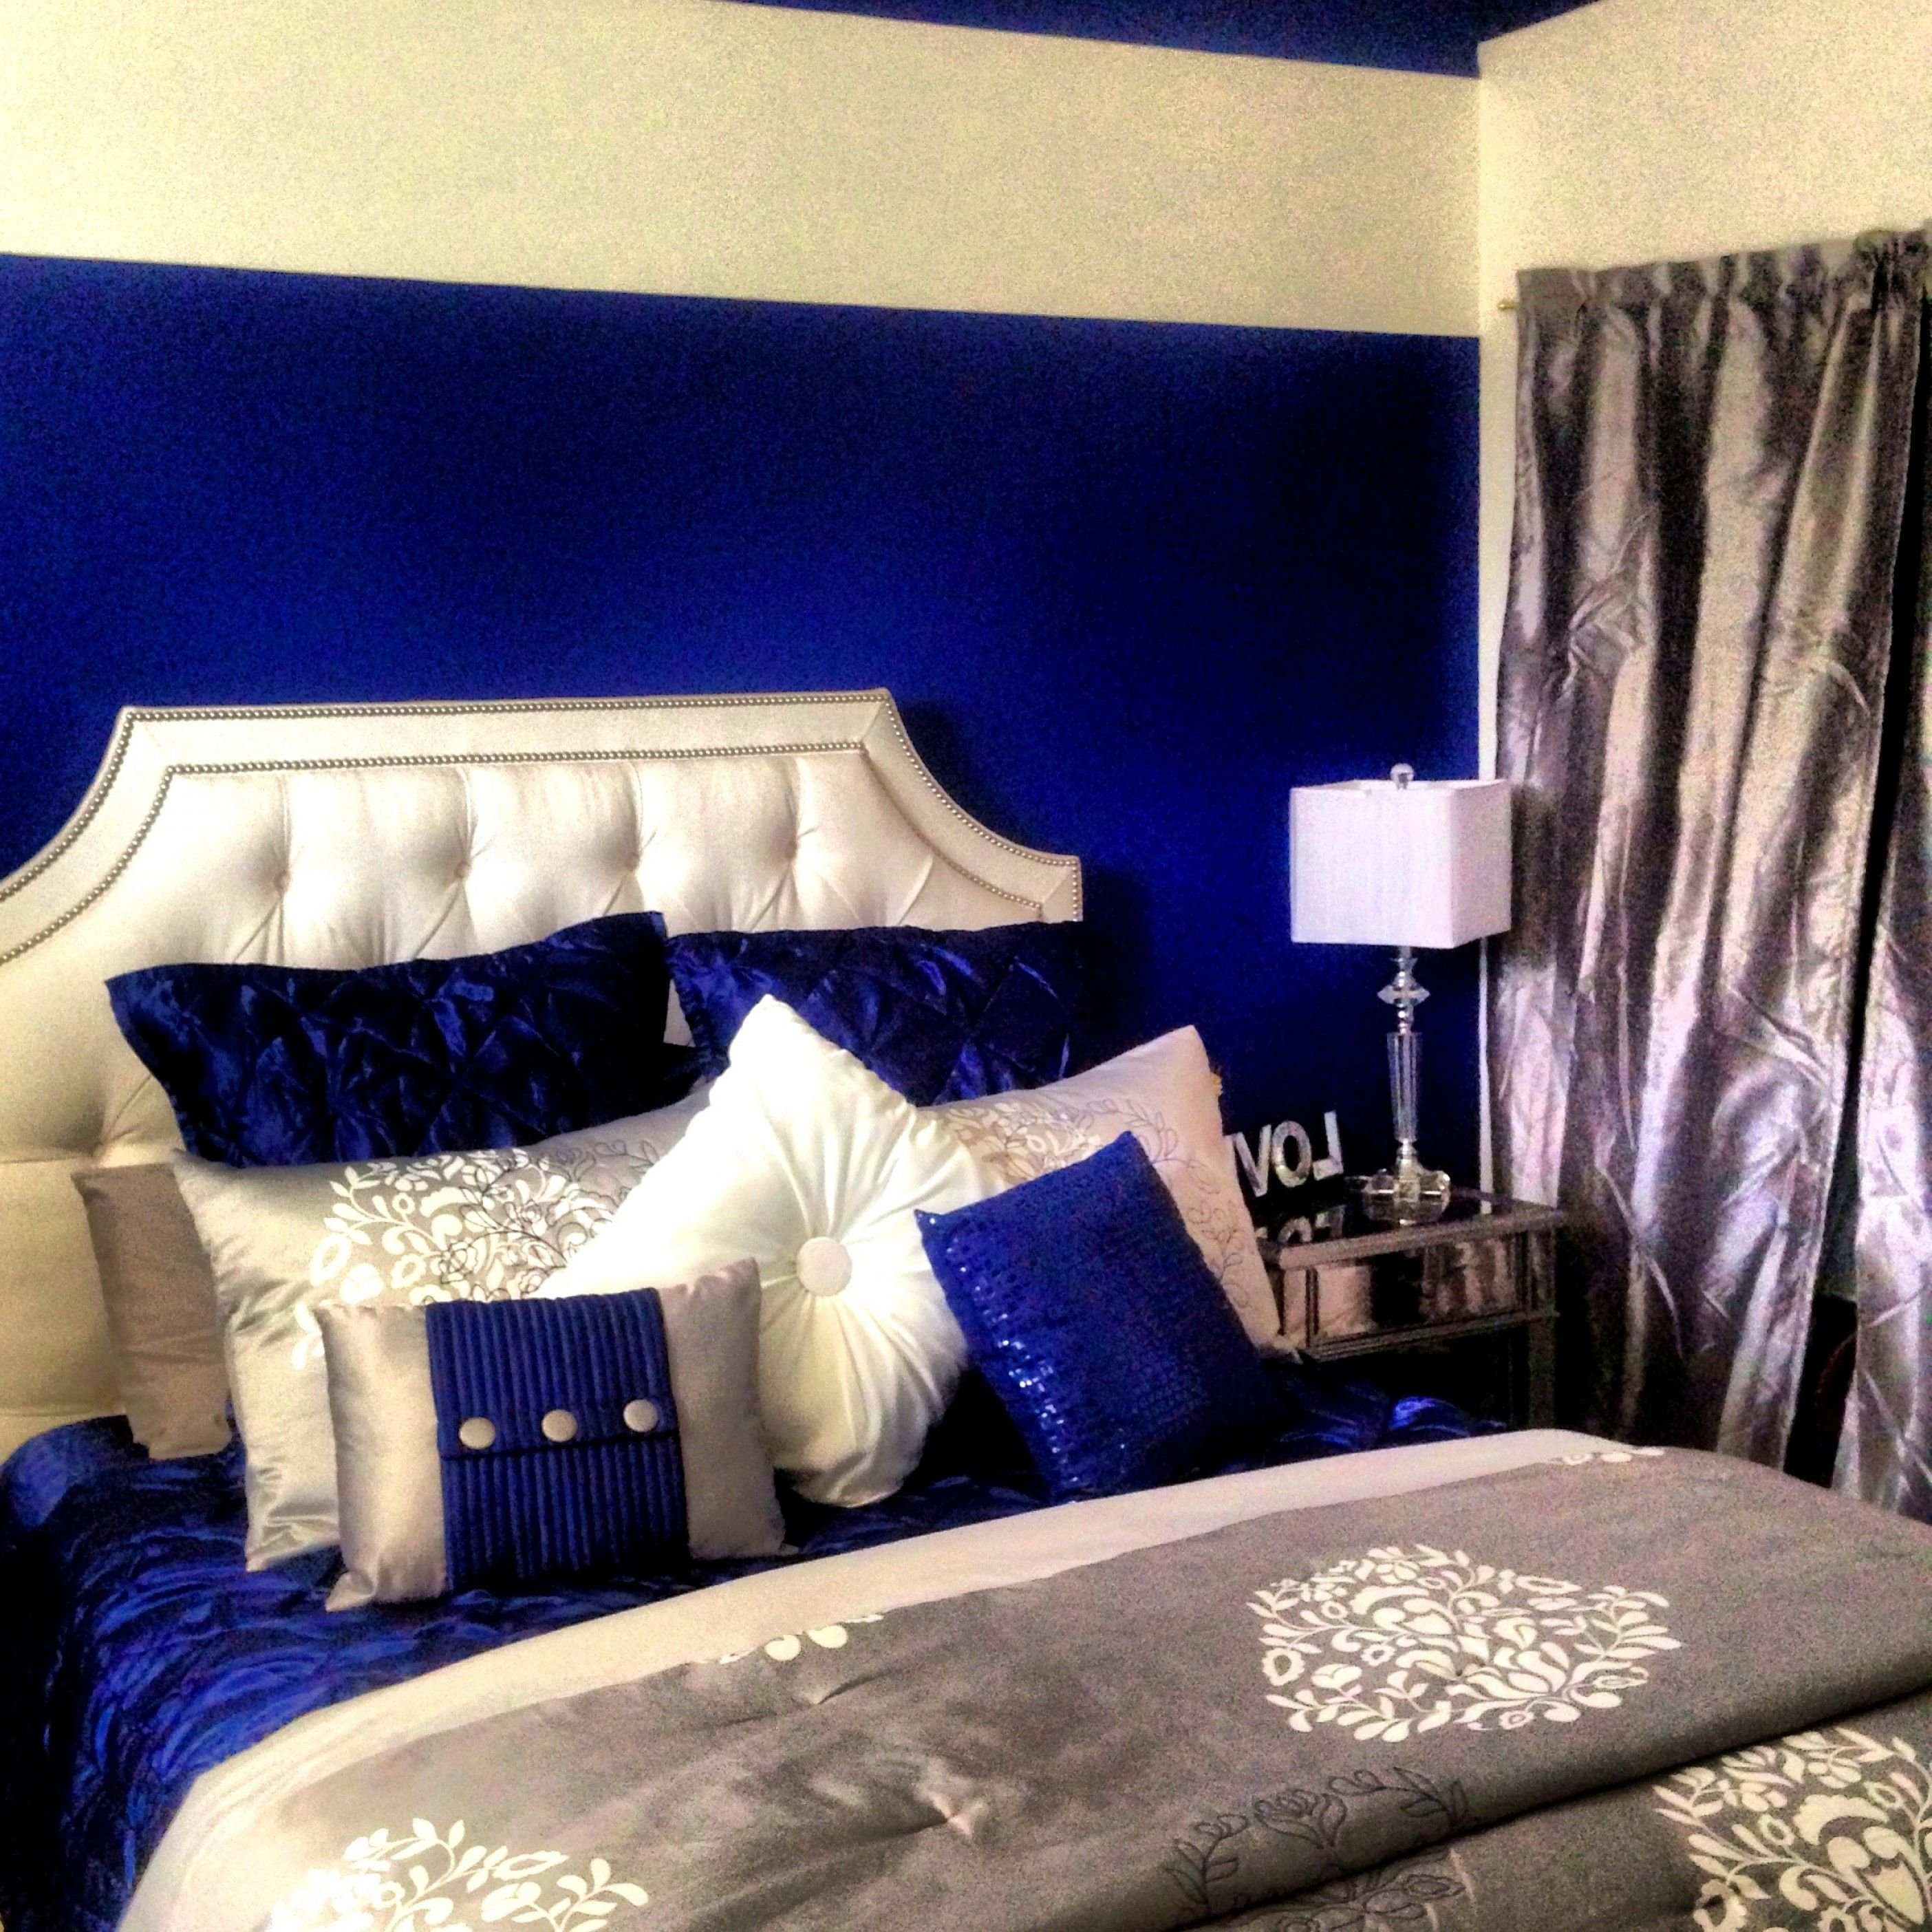 10 Amazing Black And Blue Bedroom Ideas royal blue and black bedroom ideas home sweet home blue bedroom 2024